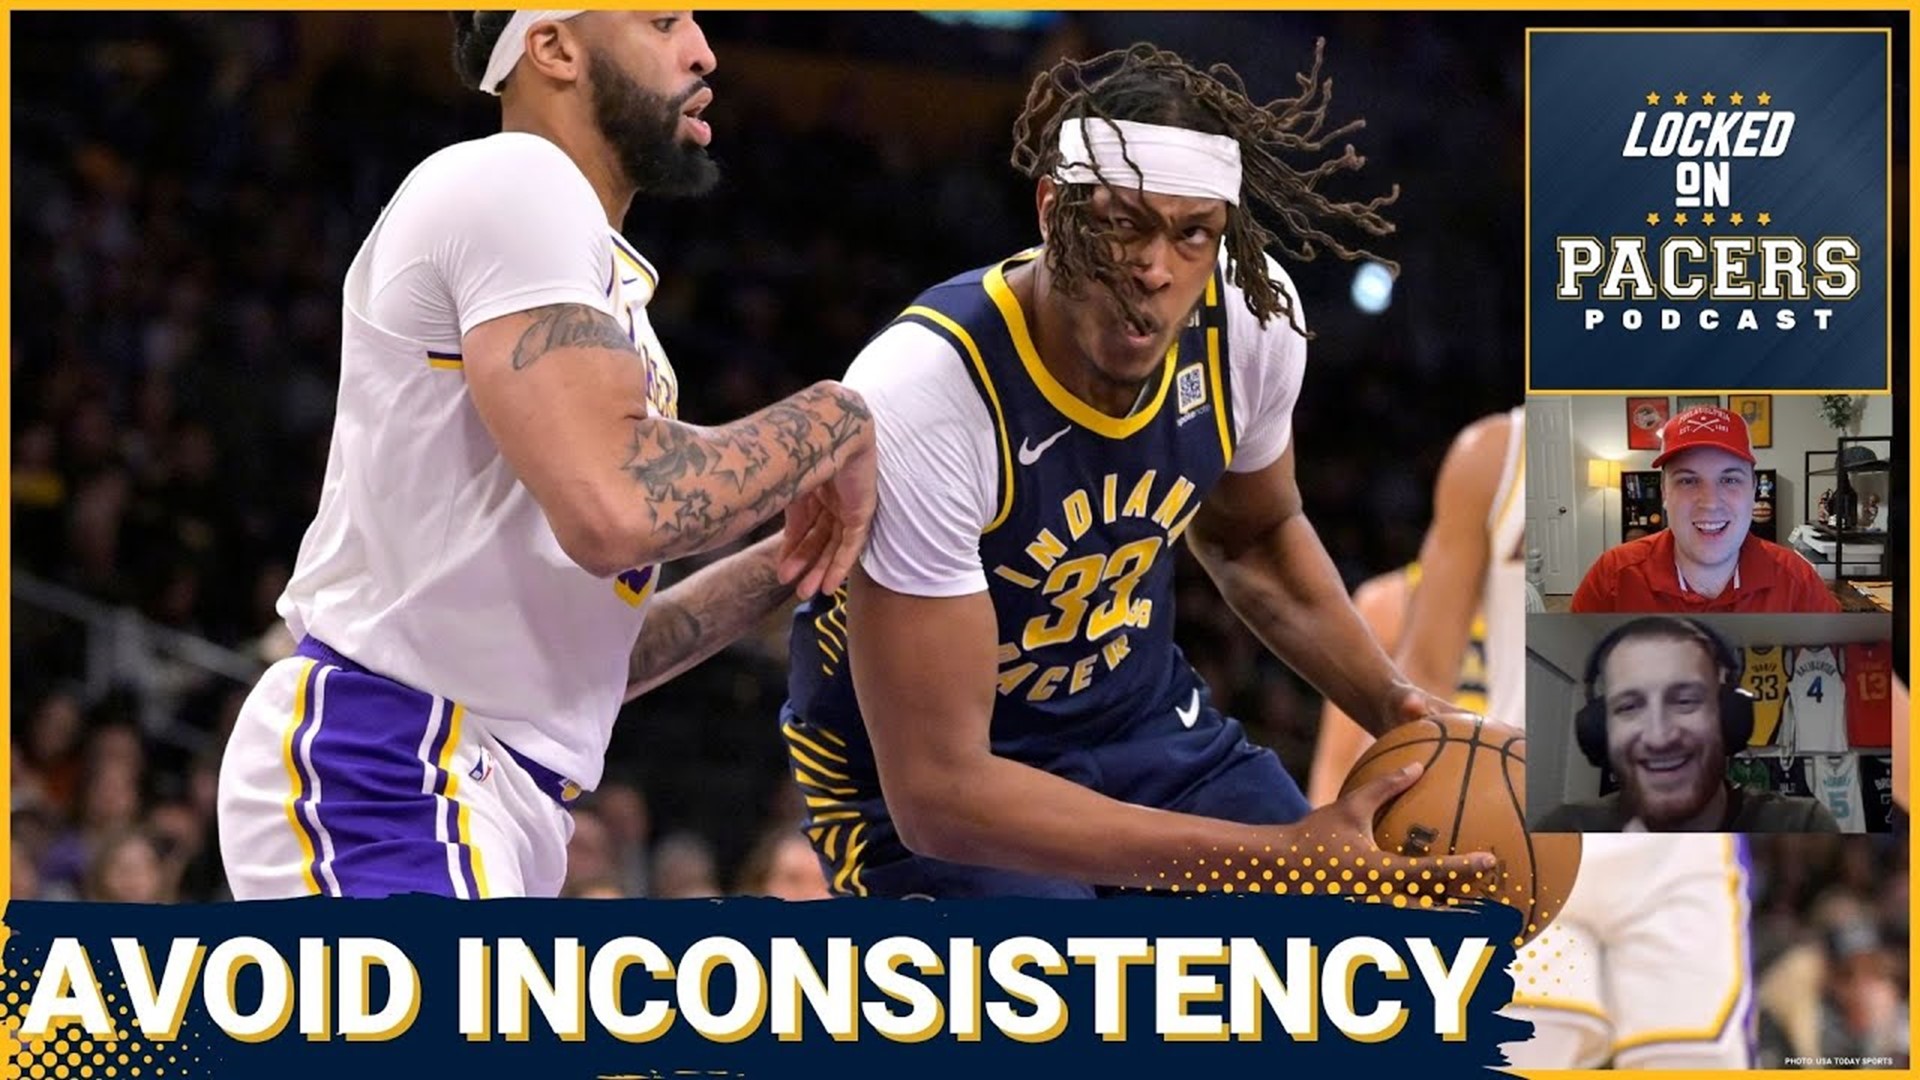 Why are the Indiana Pacers so inconsistent? Plus the rookies, Haliburton, Siakam, LA Lakers talk